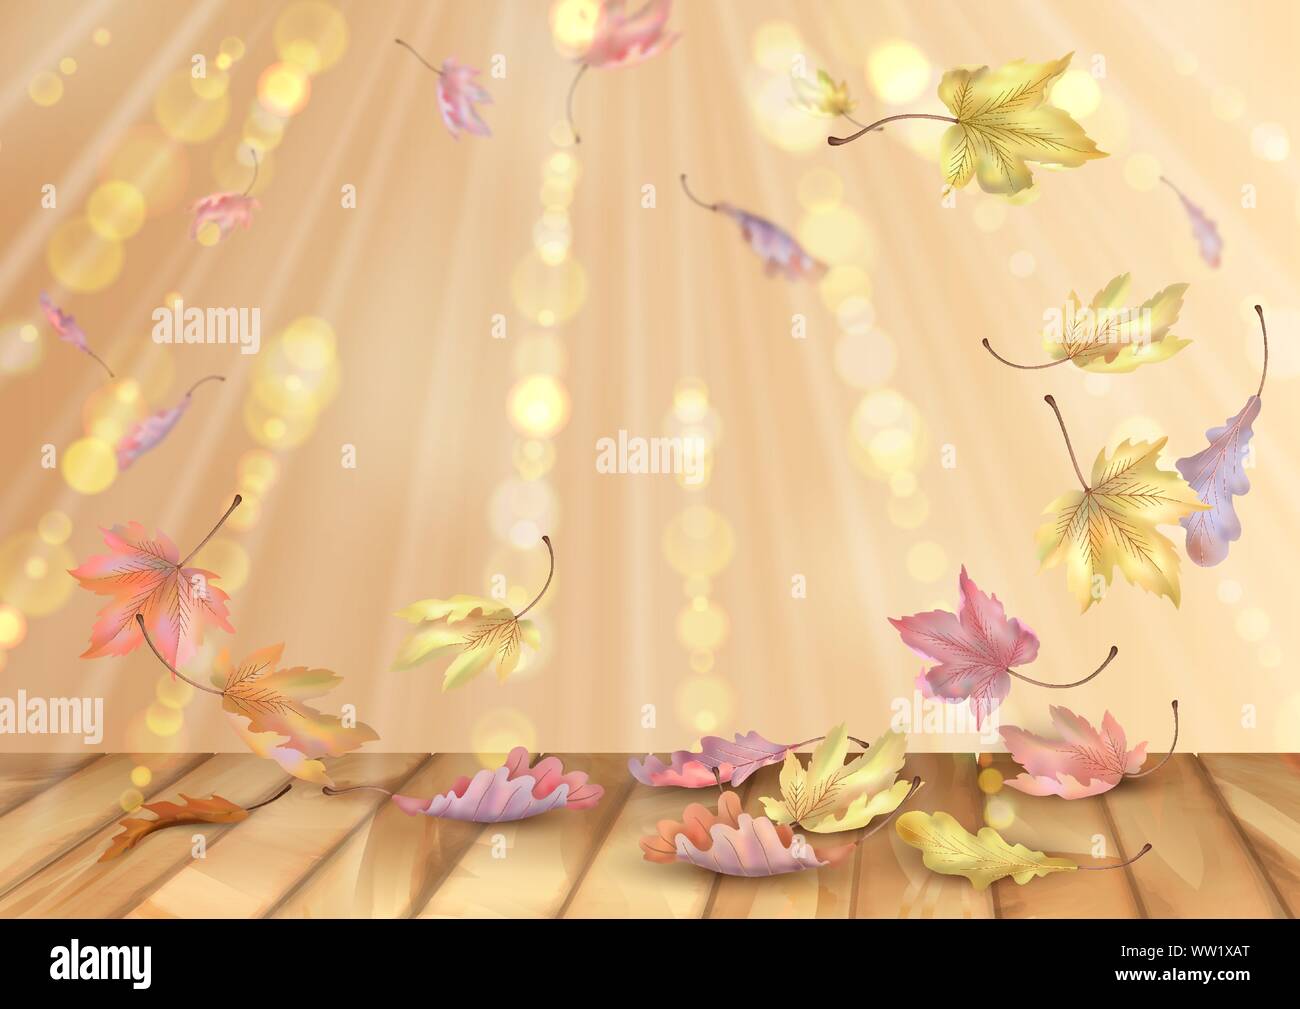 Leaves swirling in the wind Stock Vector